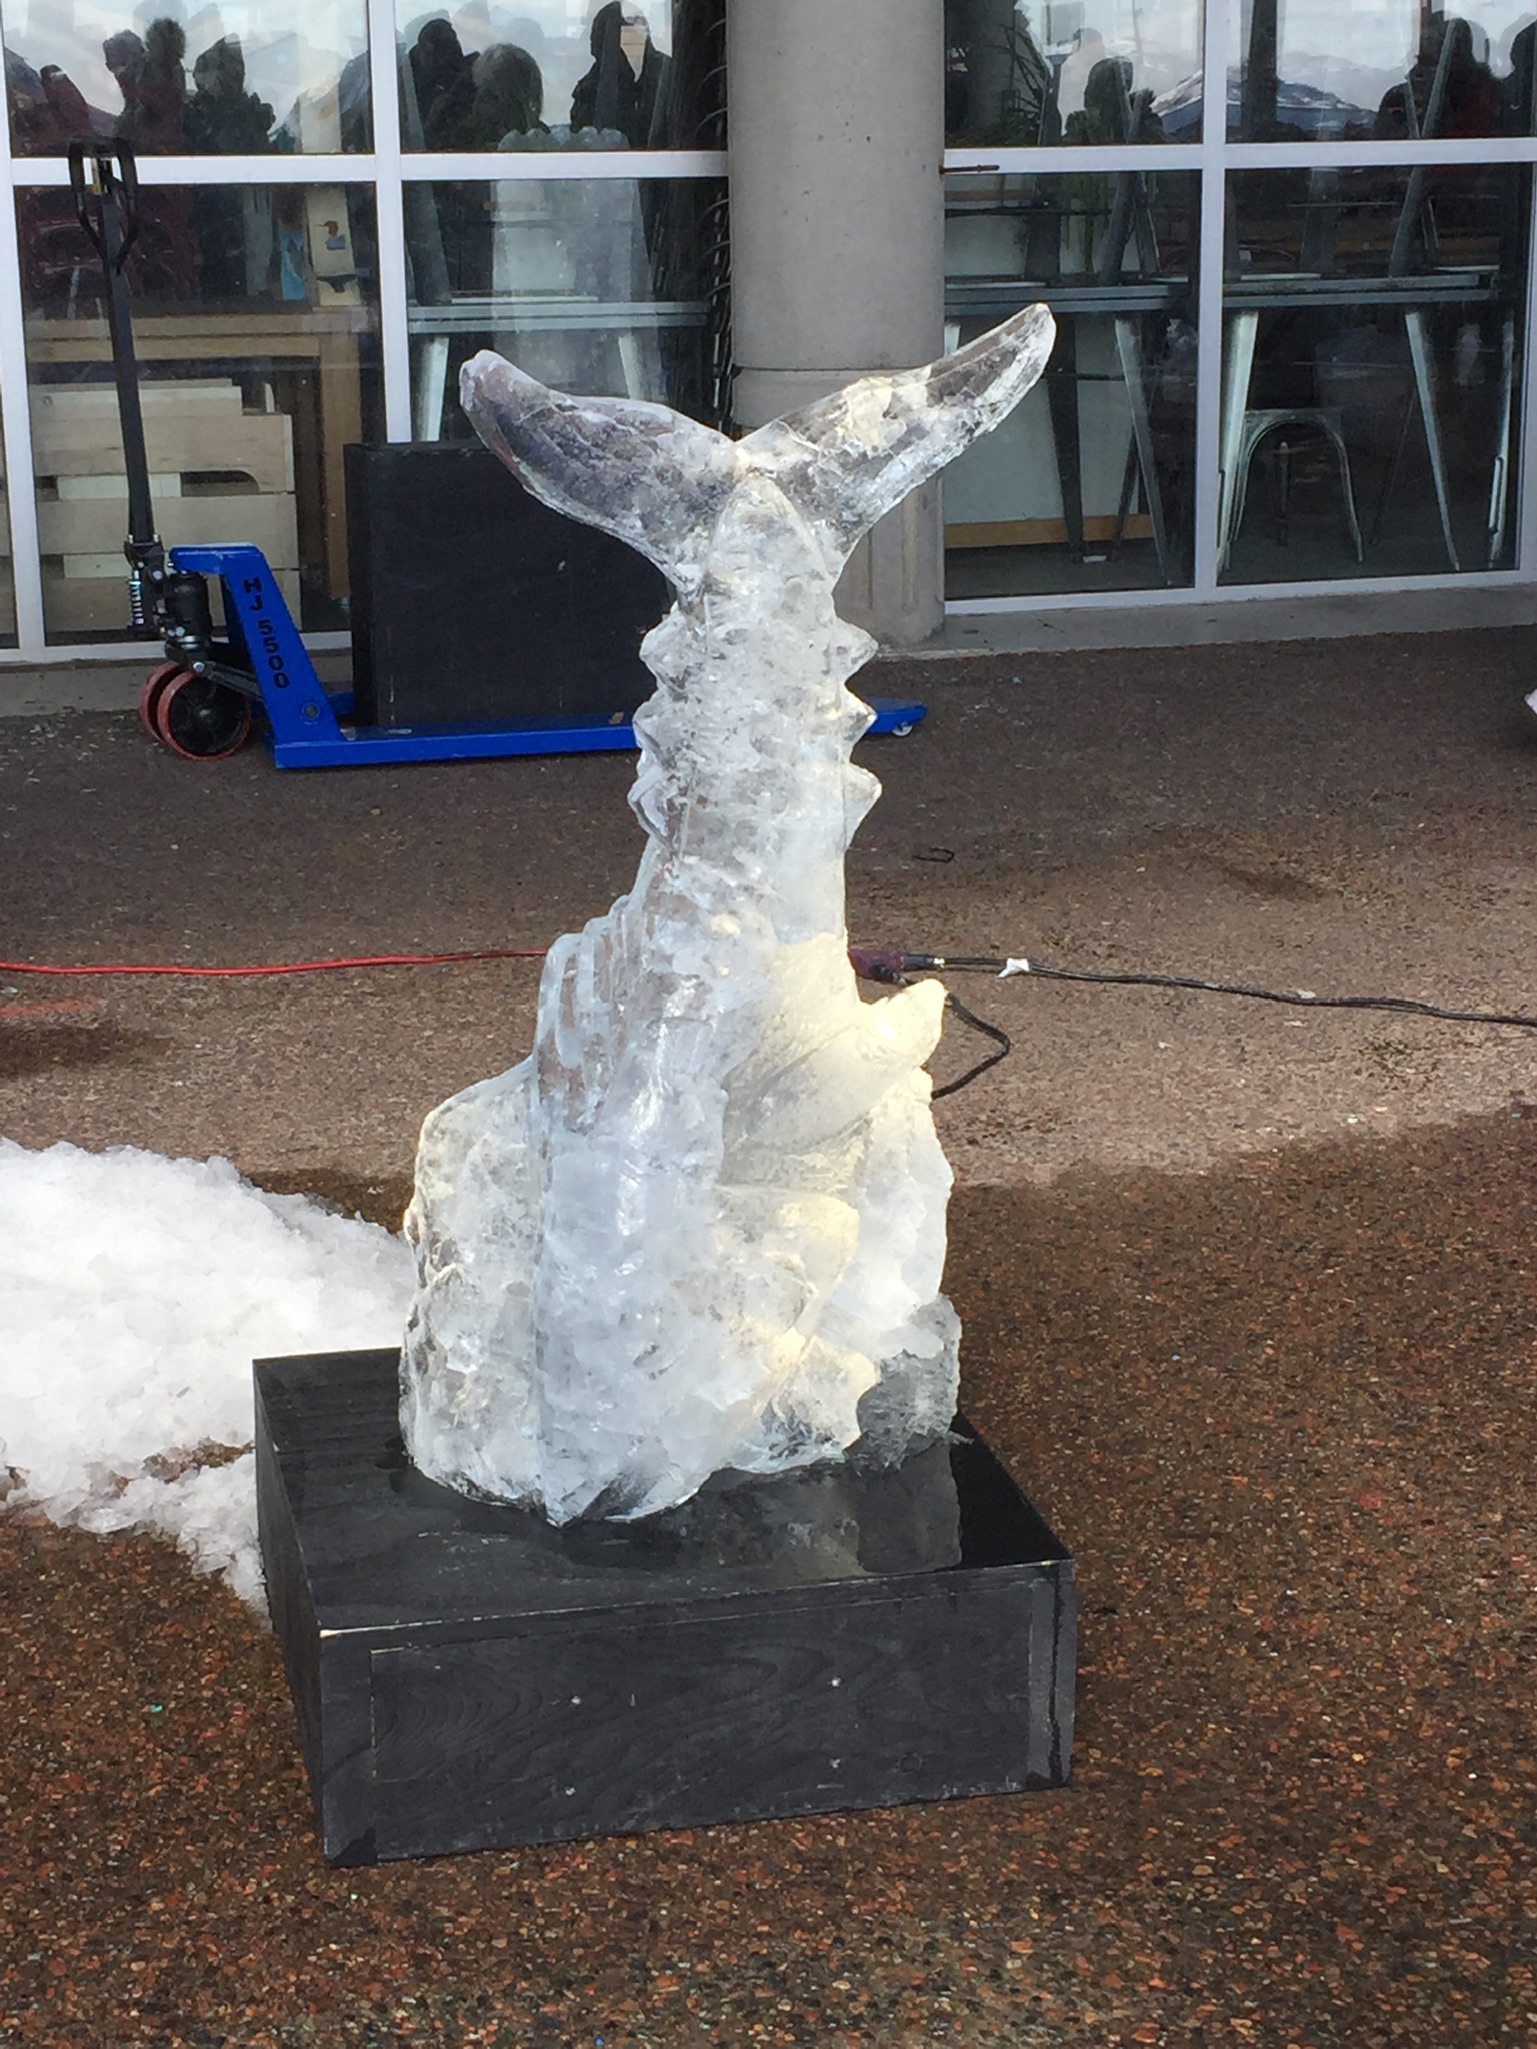 The Downtown Dartmouth Ice Festival photo @almightypossum